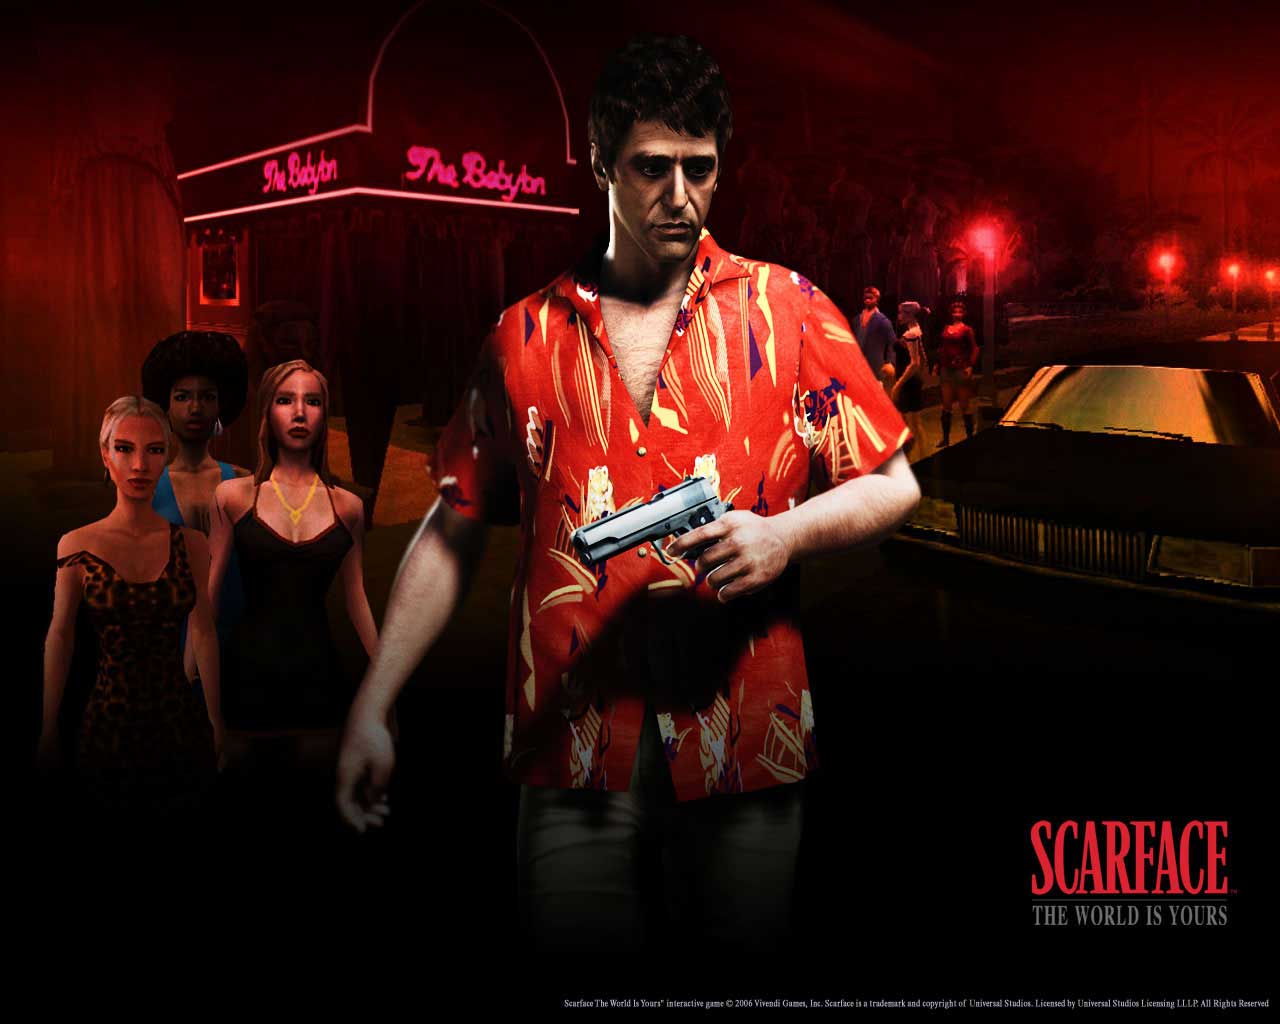 The Sierra Chest - Scarface The World Is Yours Art - HD Wallpaper 